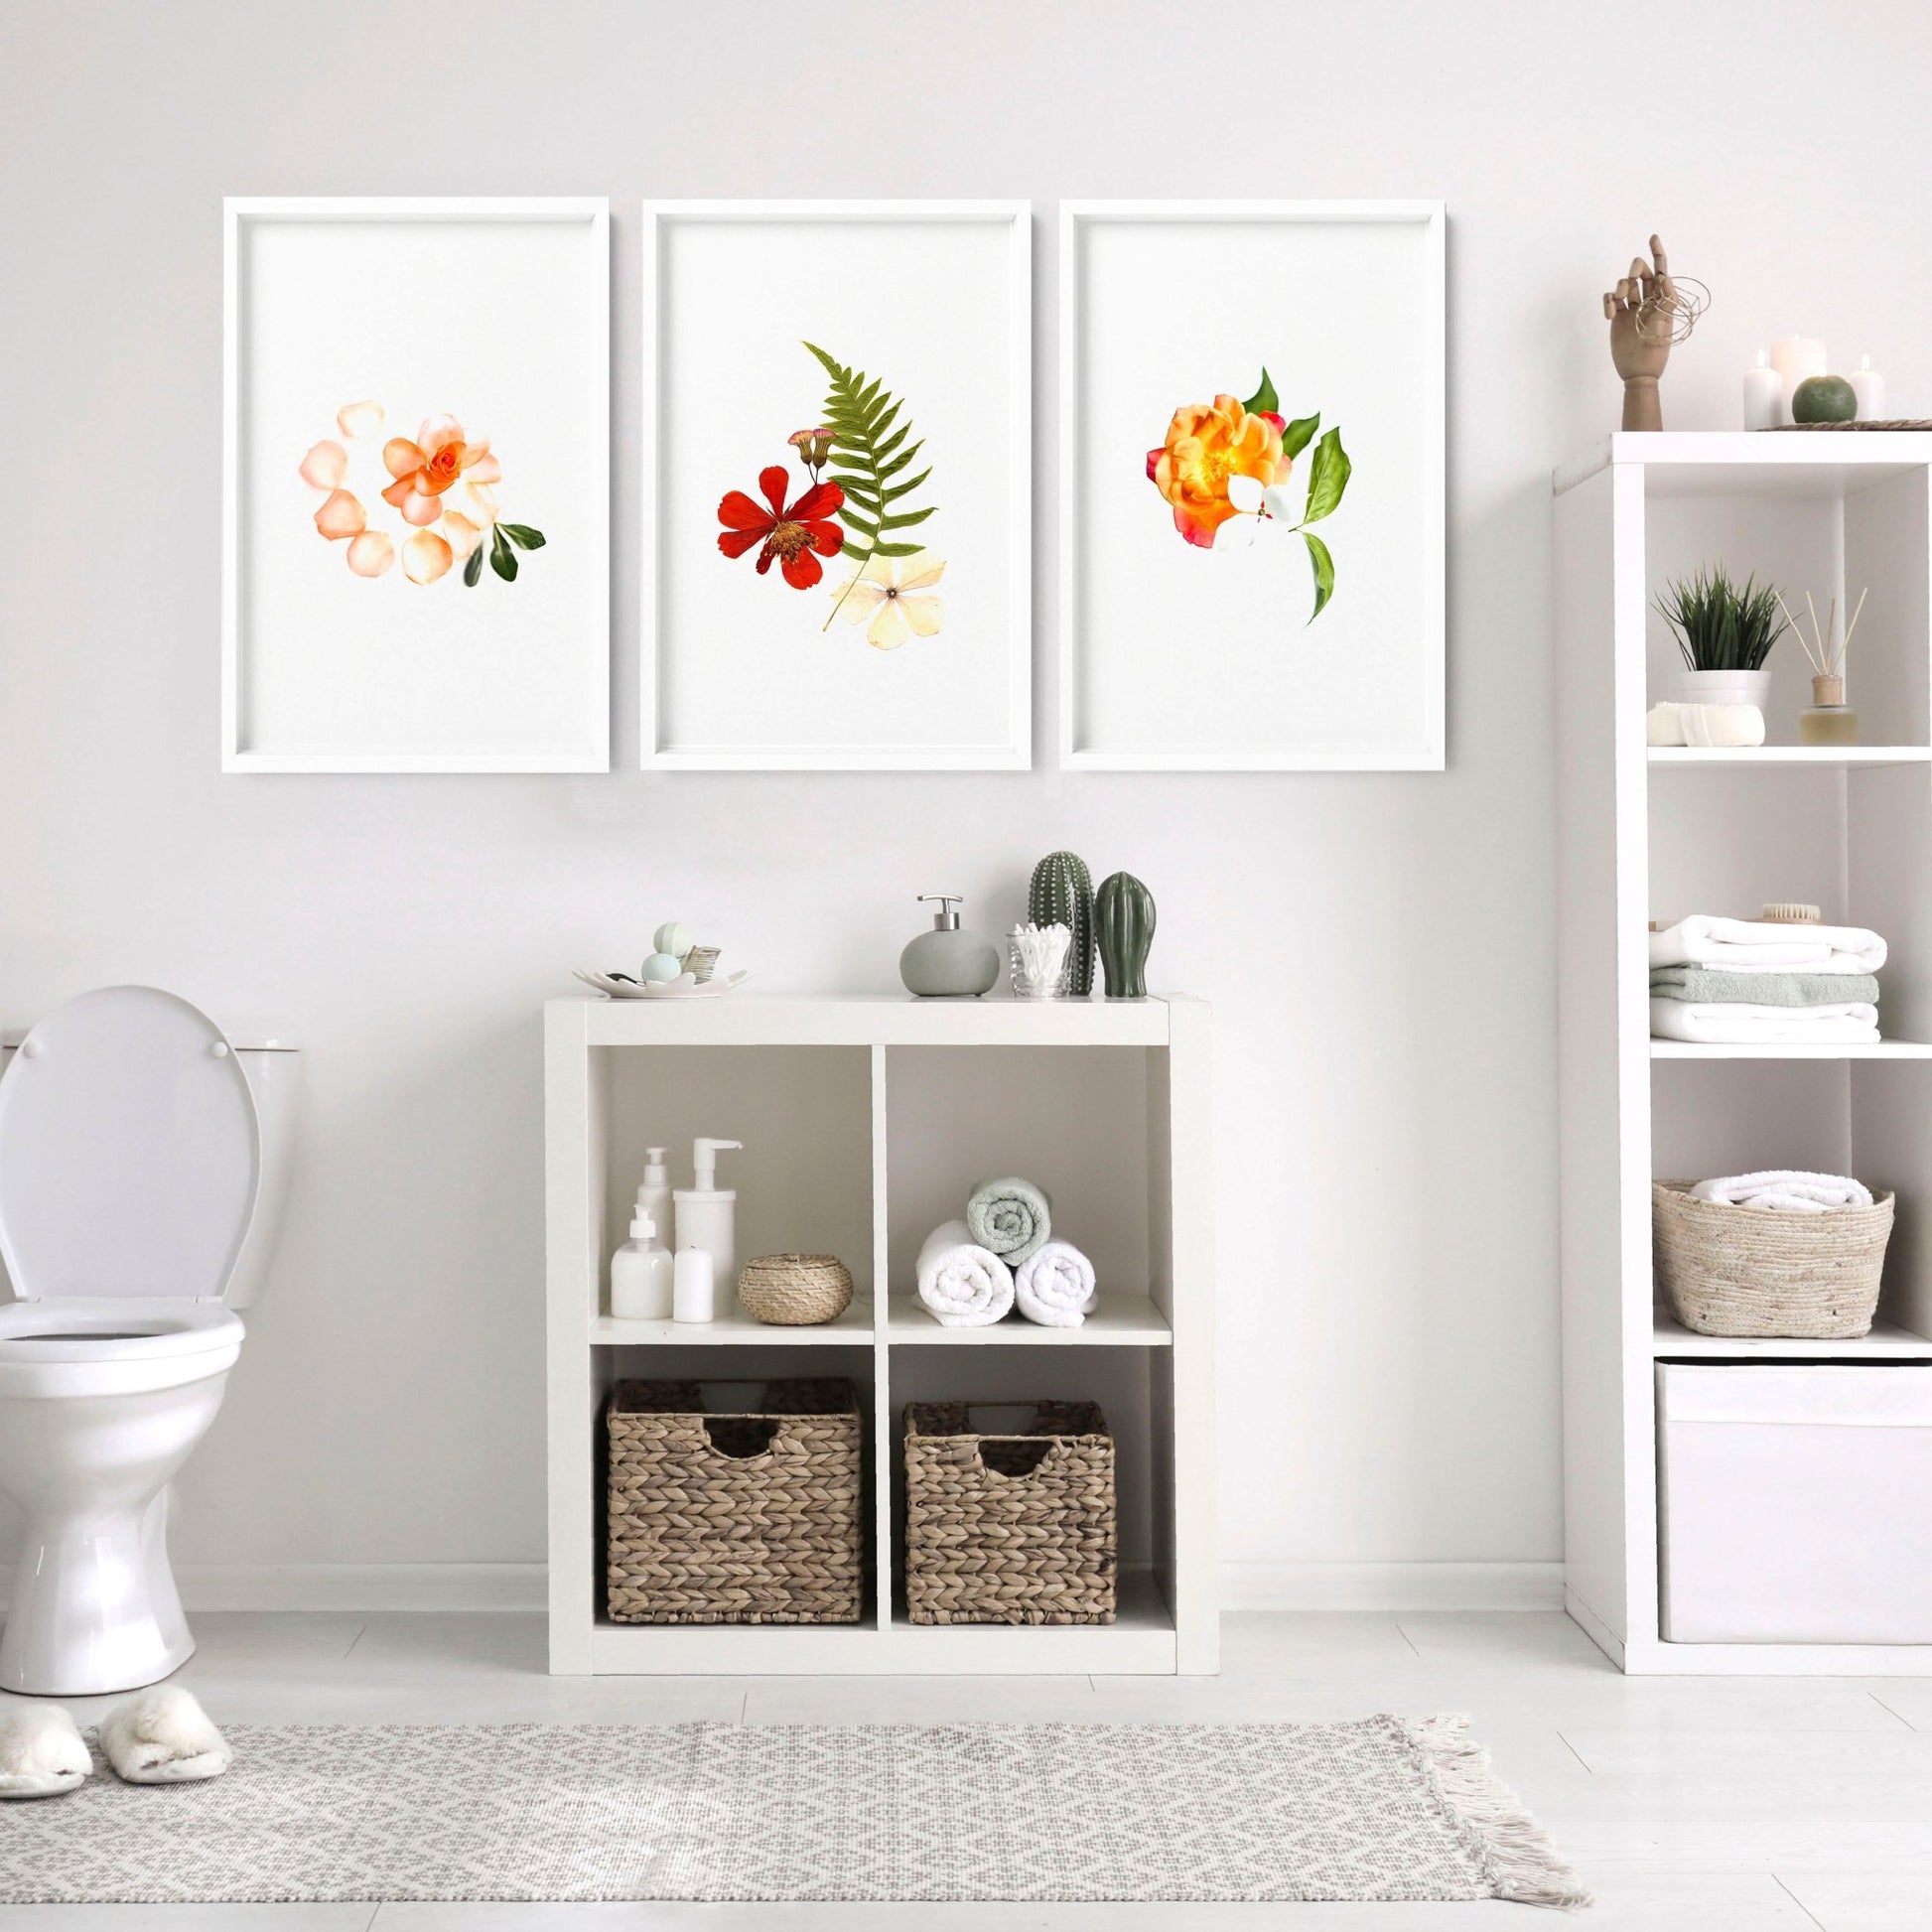 Wall art for a bathroom | set of 3 wall art prints - About Wall Art